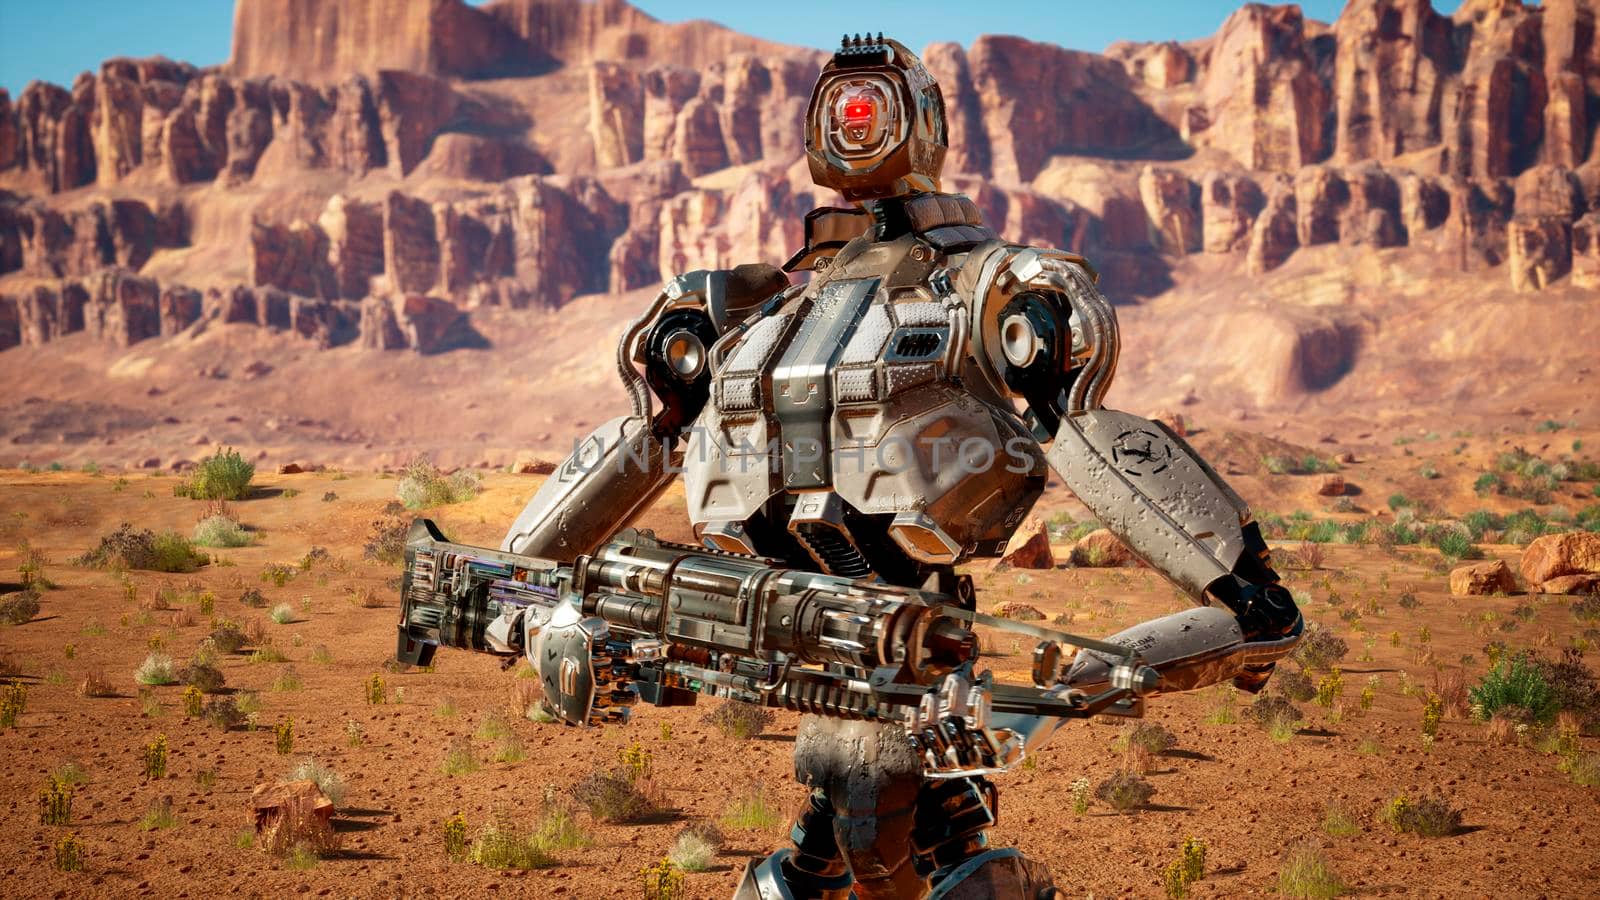 Military robot-android in the desert surveys the territory.